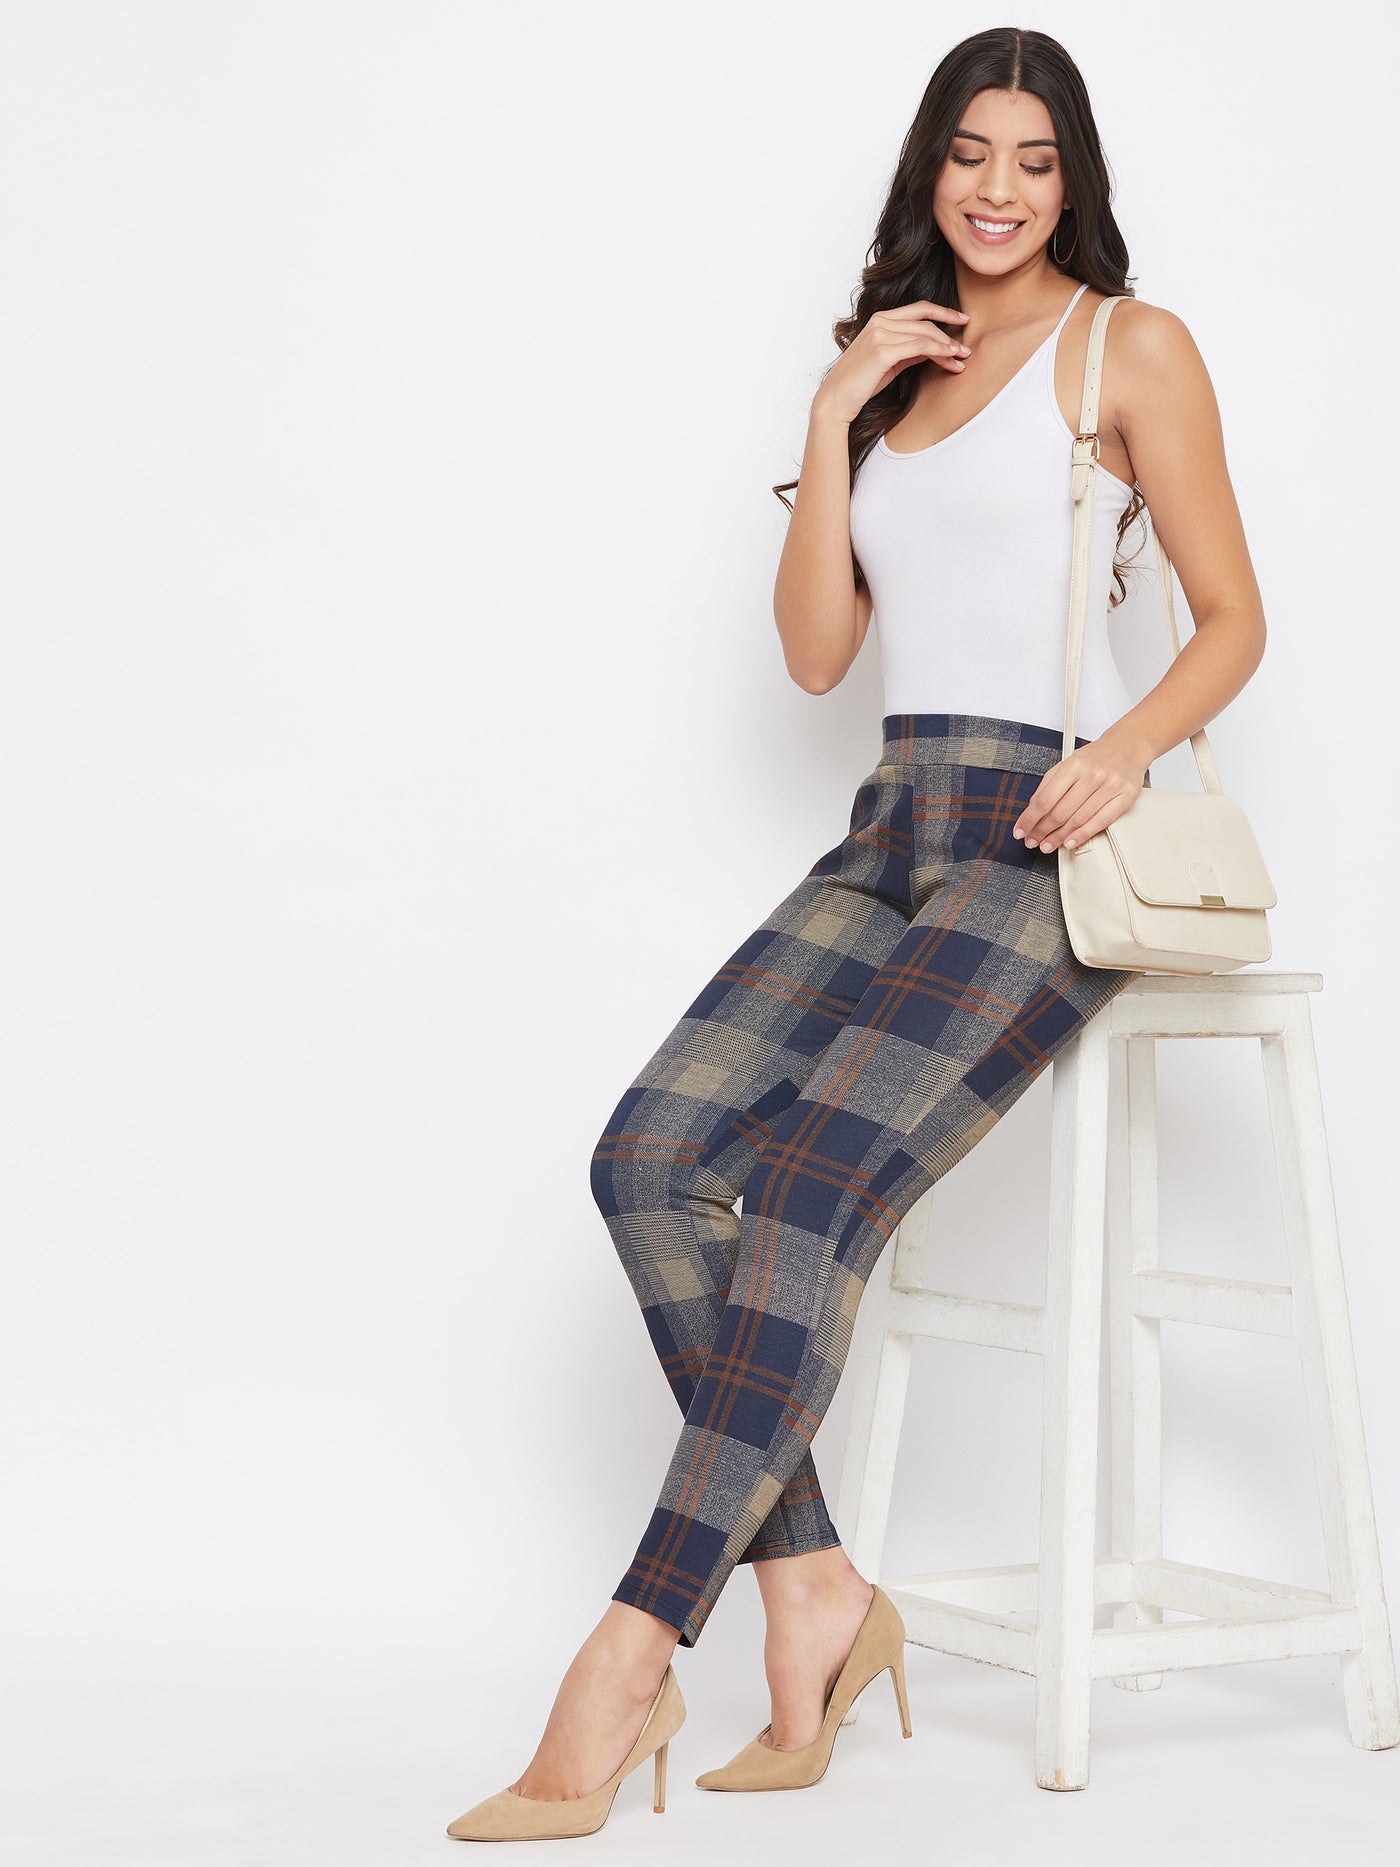 Plaid Checked Skinnyfit Pants - Women Trousers